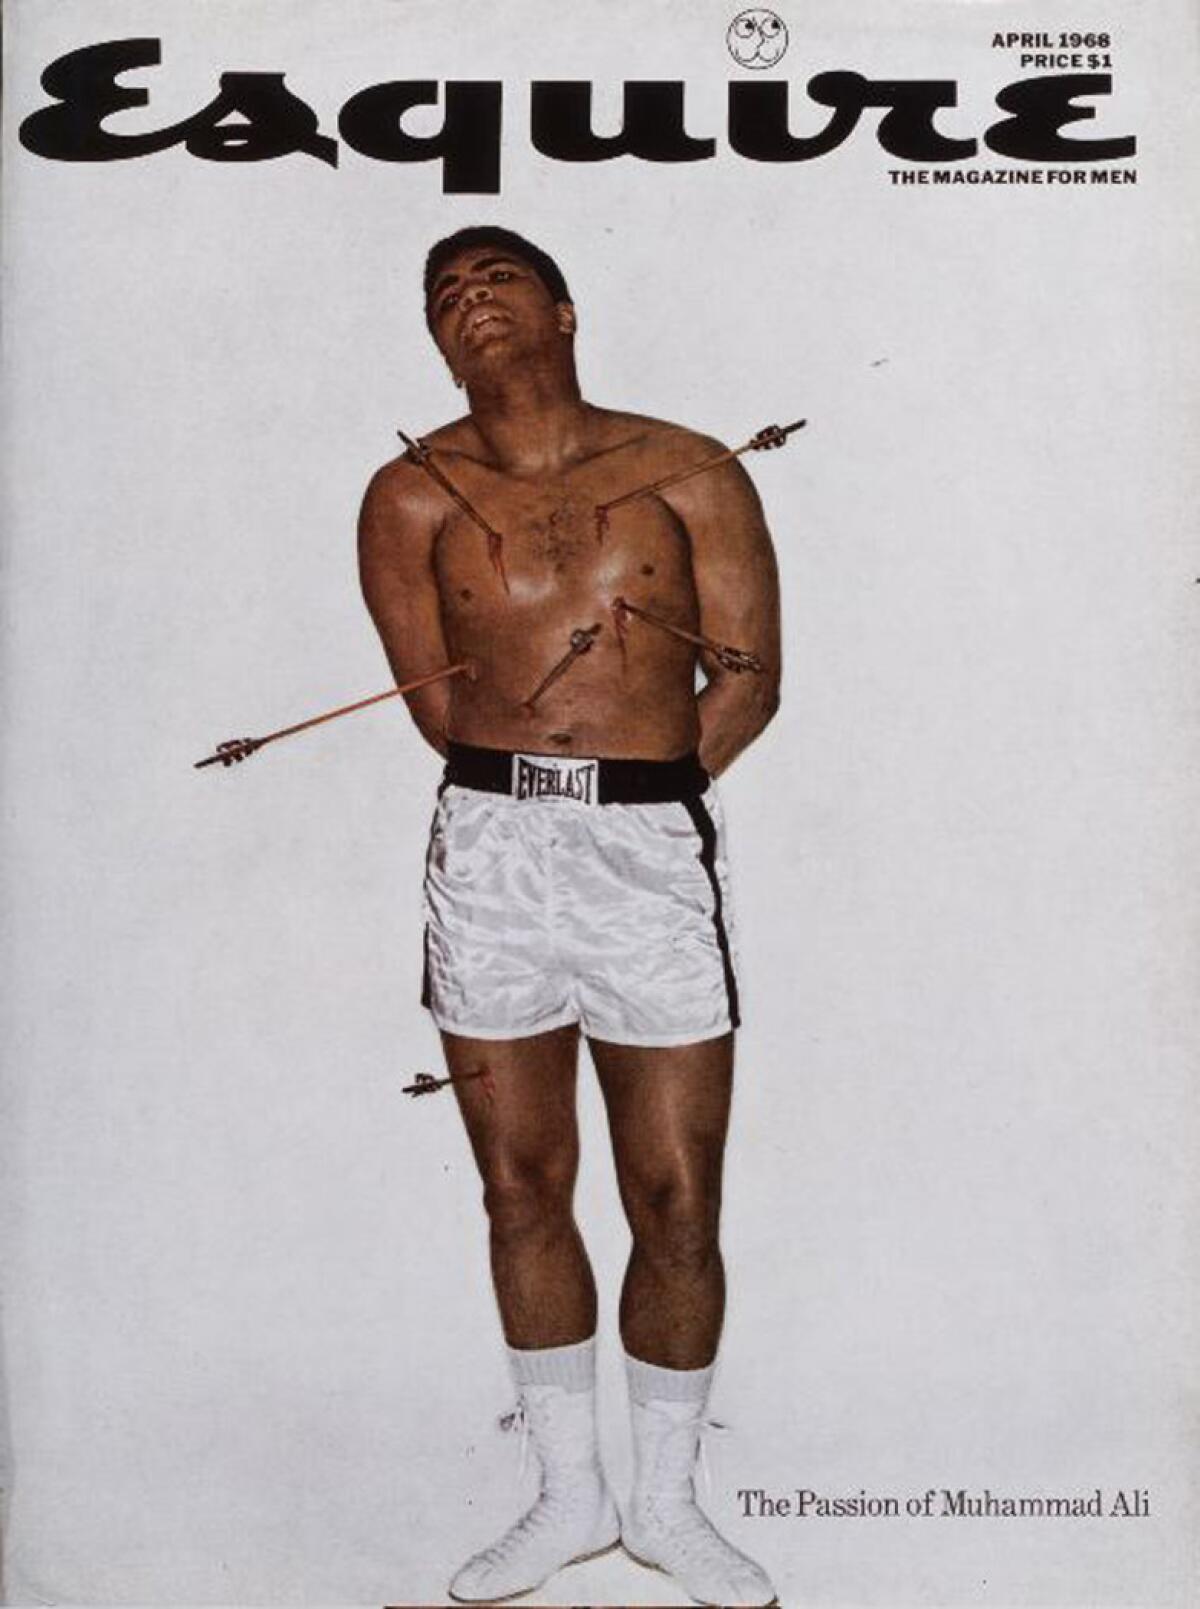 The April 1968 cover of Esquire magazine depicts Muhammad Ali with arrows in his body.